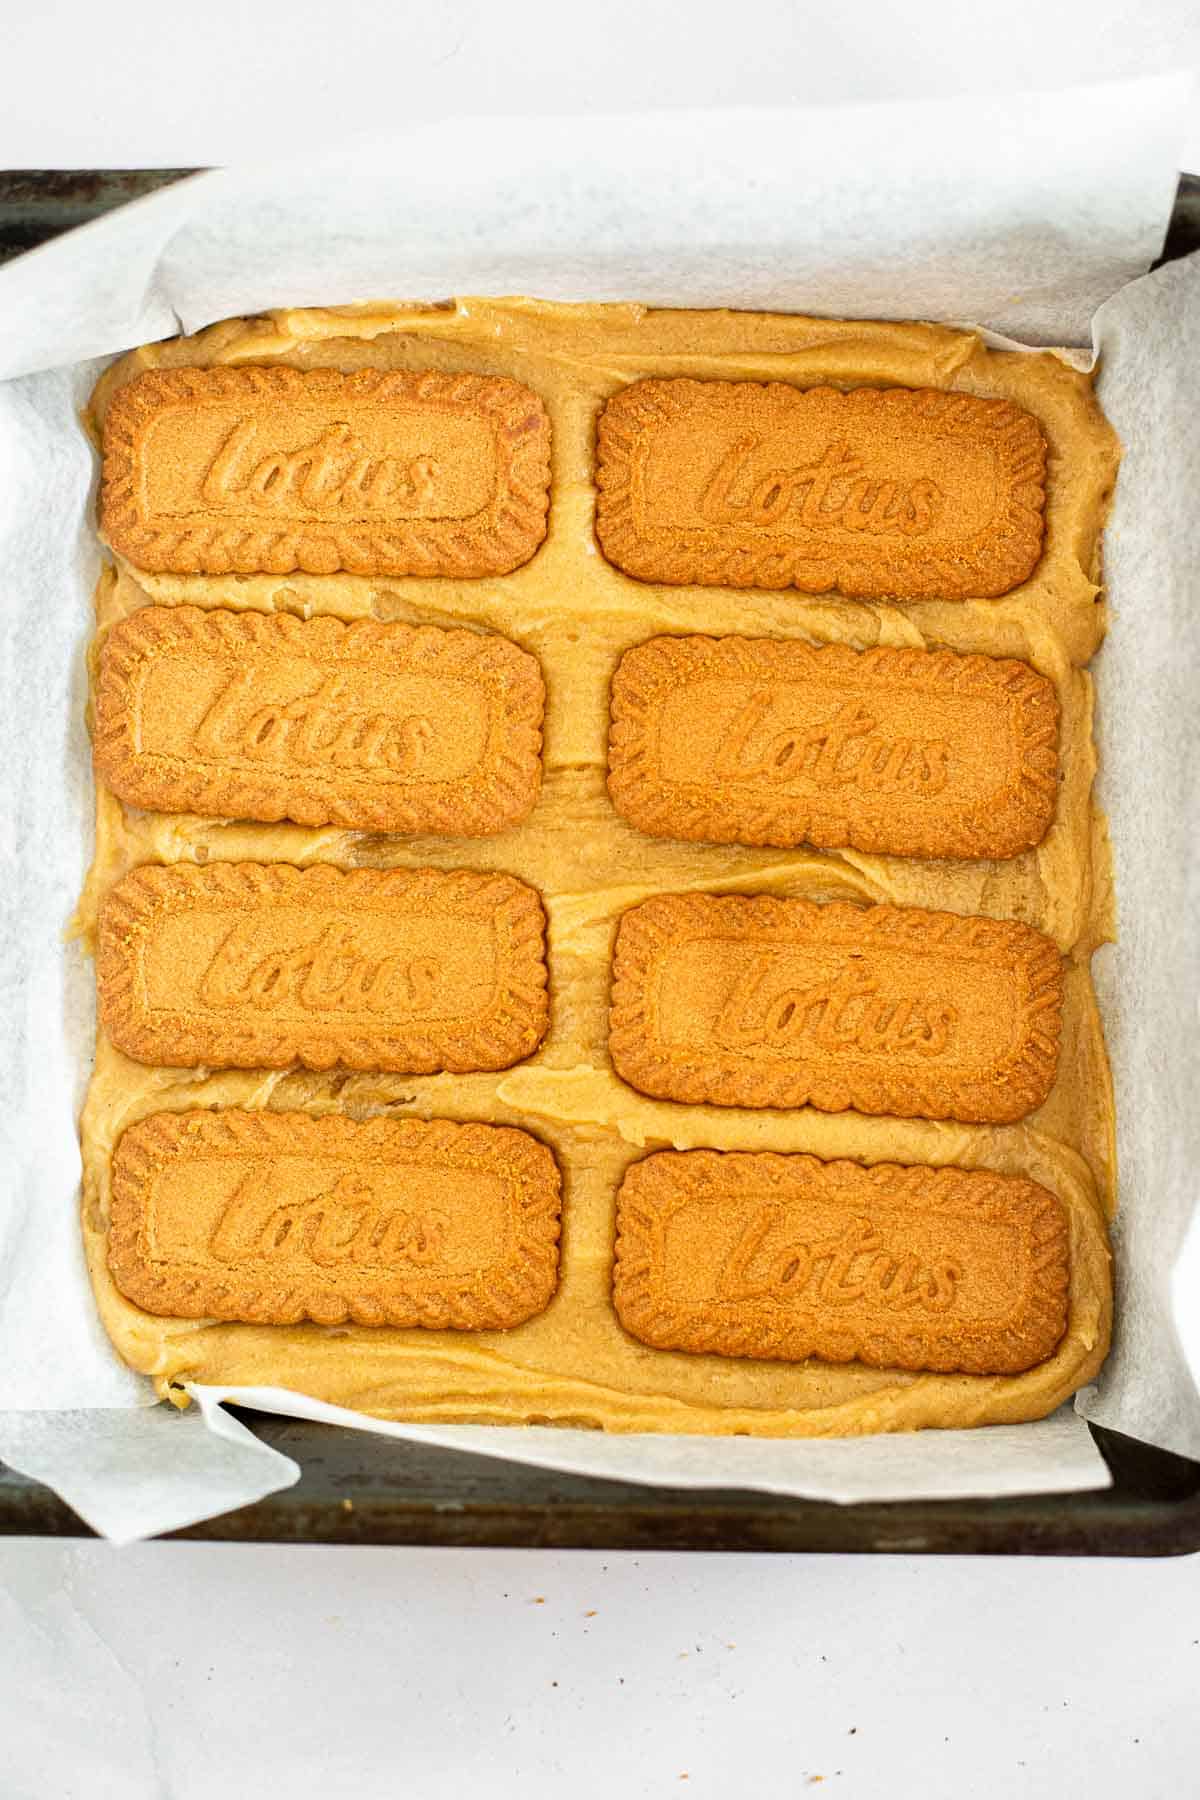 blondie batter with 2 rows of 4 Lotus biscuits on top.